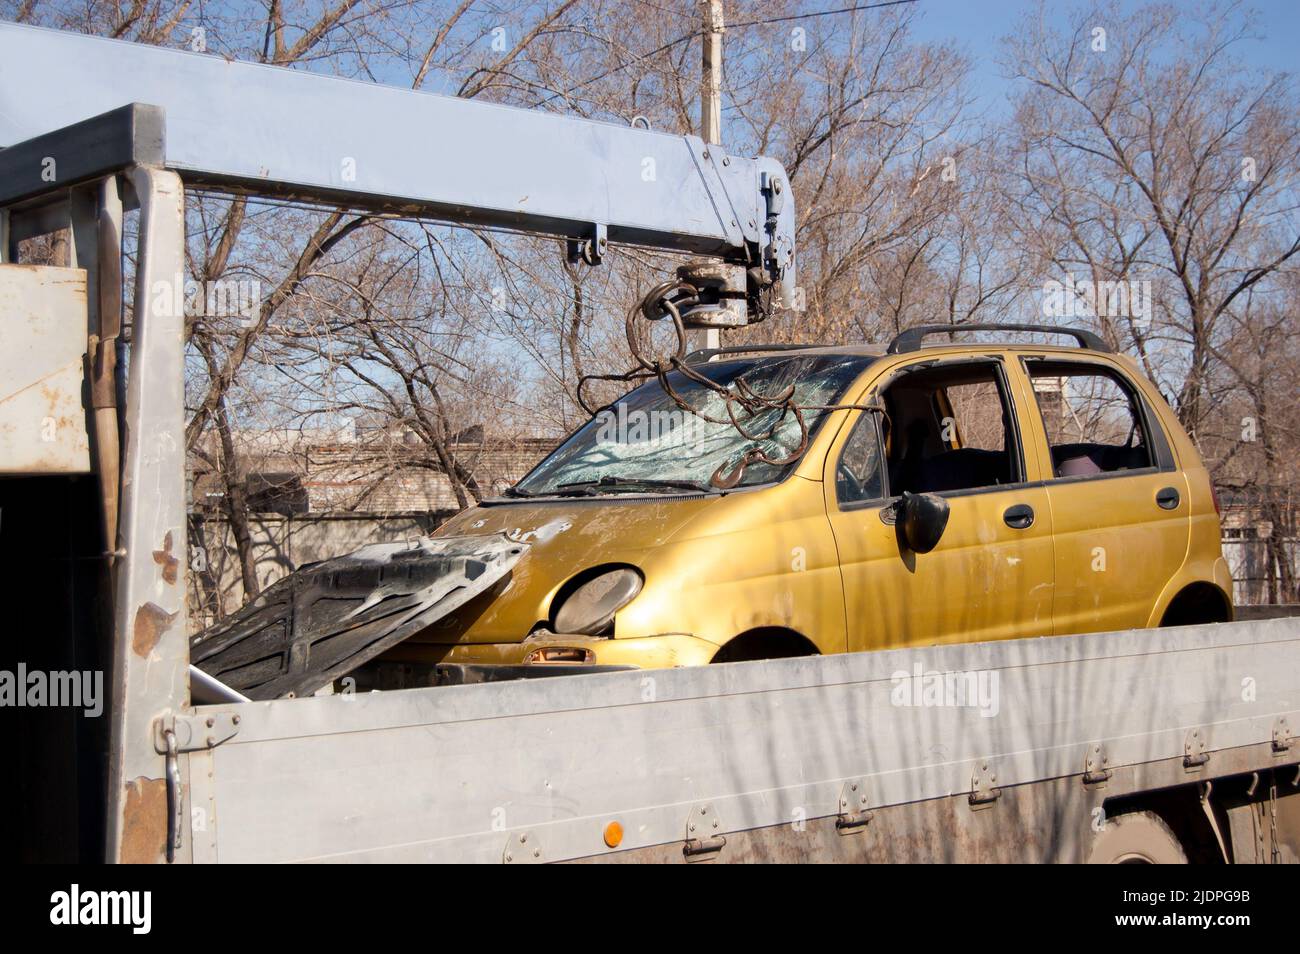 Tow truck with a broken car after an accident in its back. Stock Photo